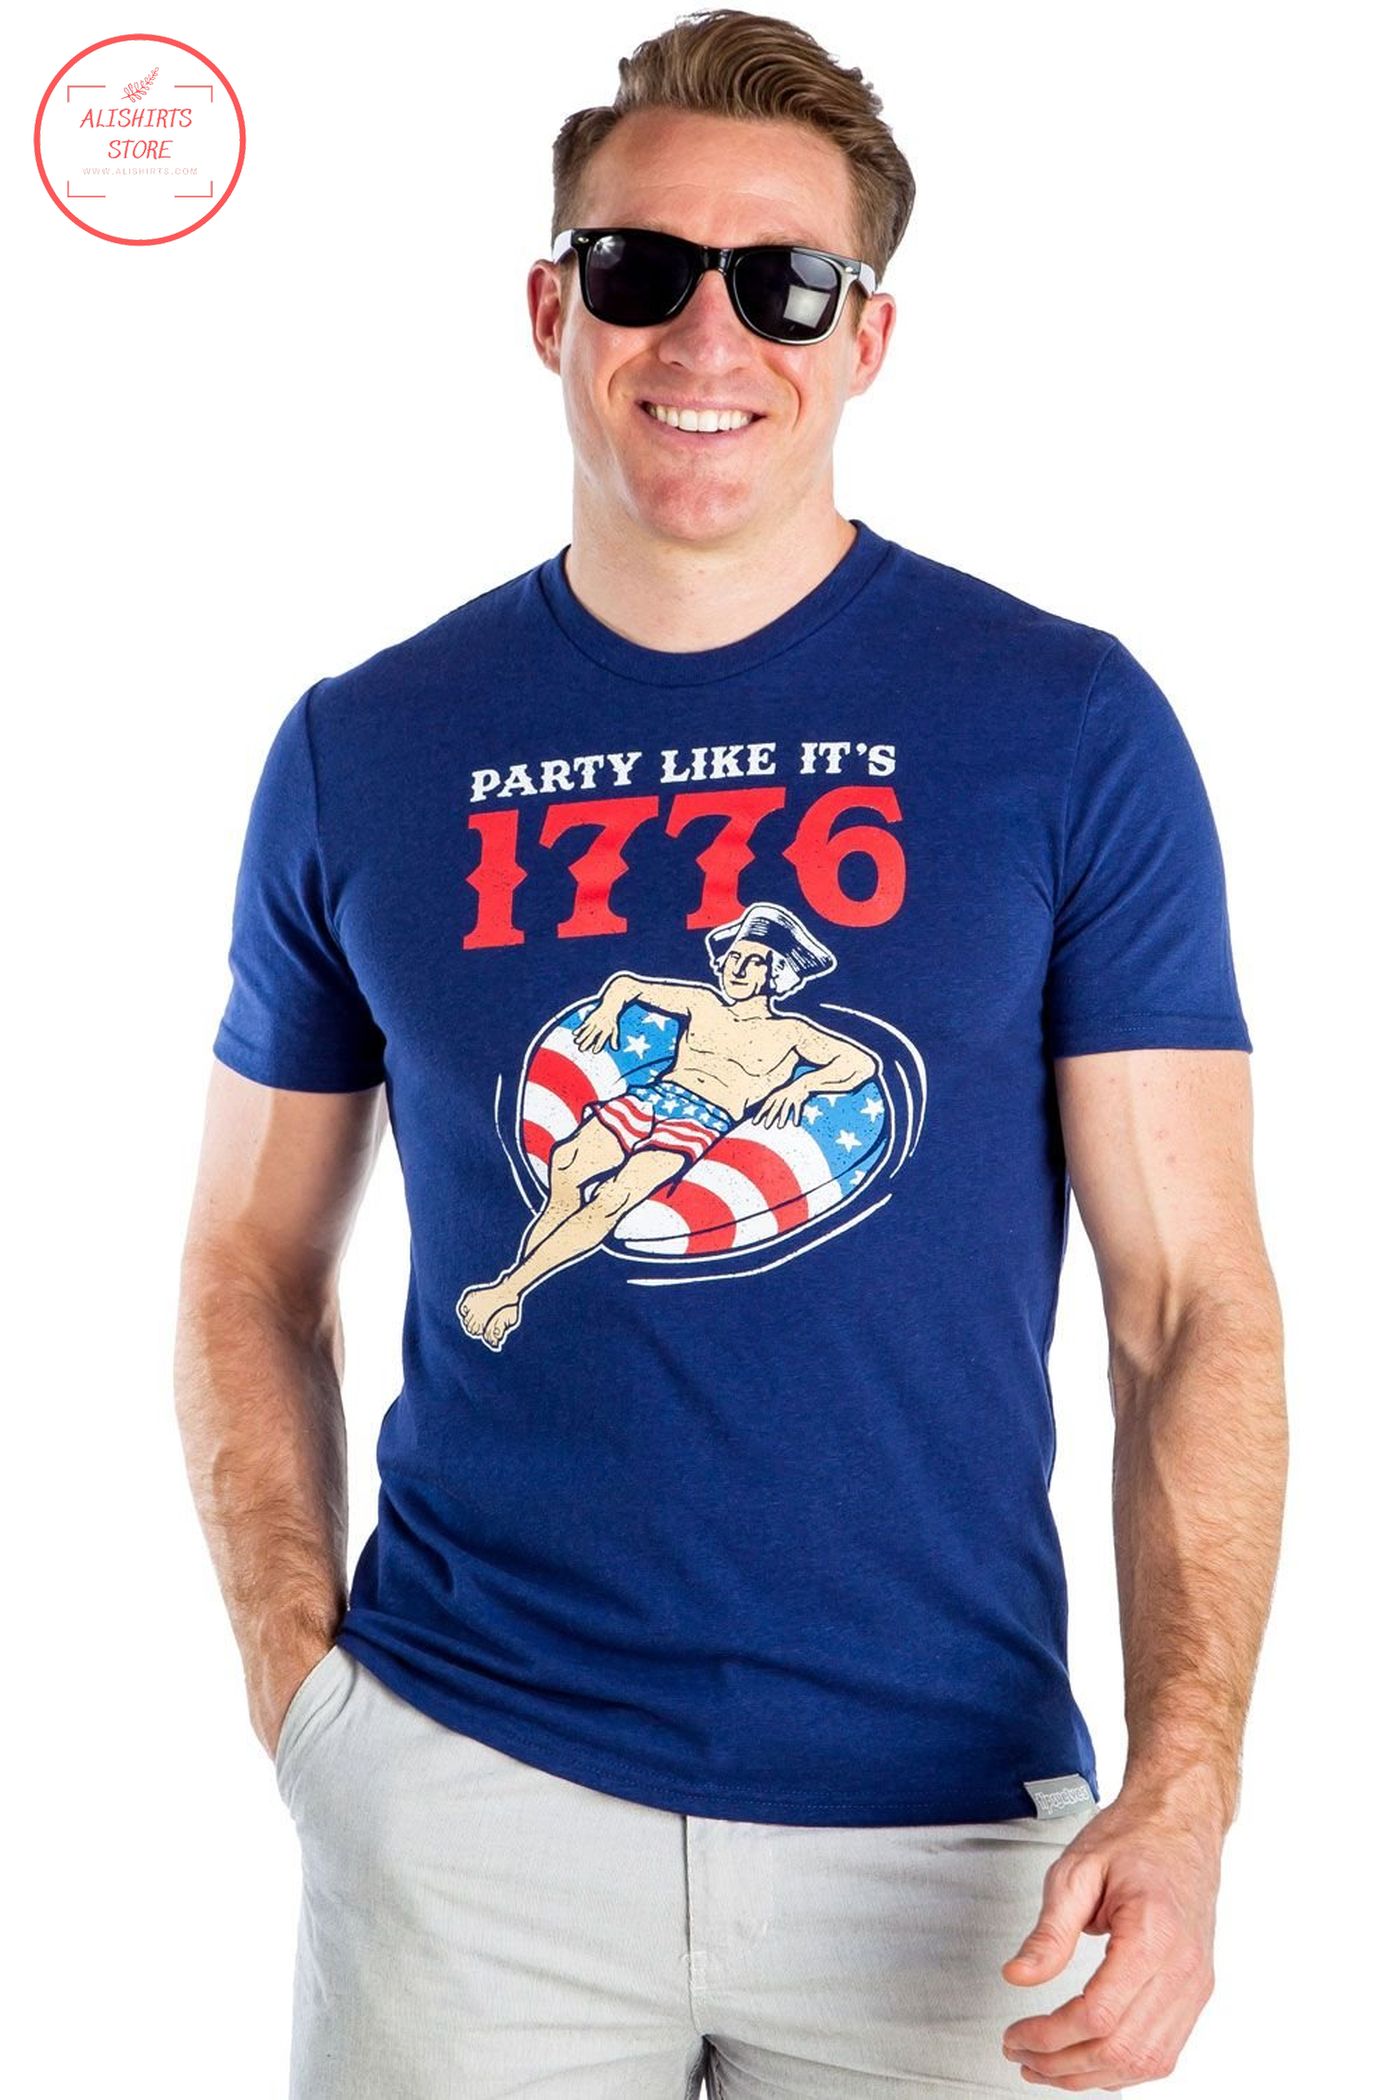 Party like it's 1776 shirt 4th of July edition